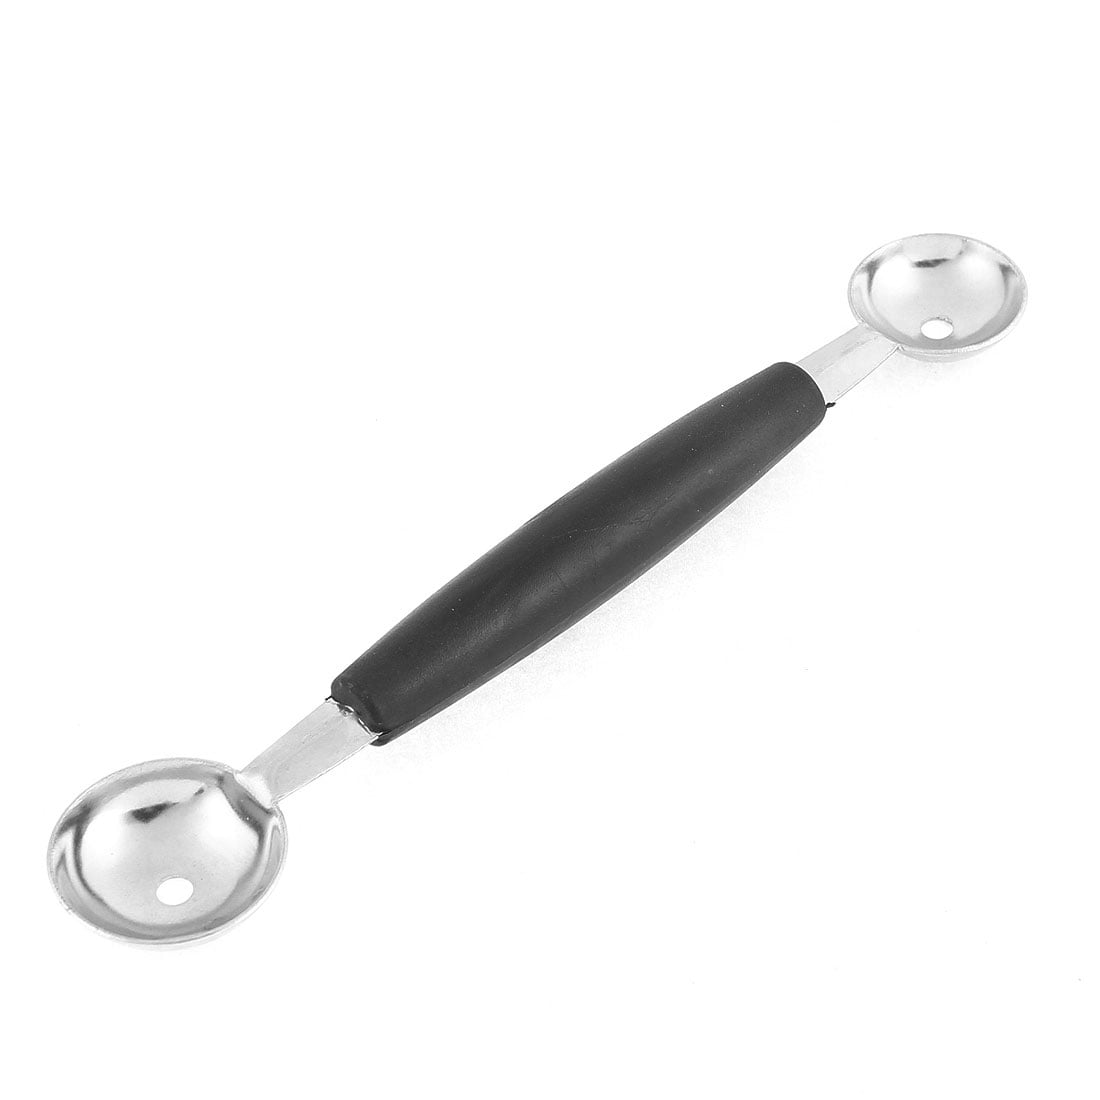 5pcs Double Ended Headed Fruit Ice Cream Ball Spoon,stainless